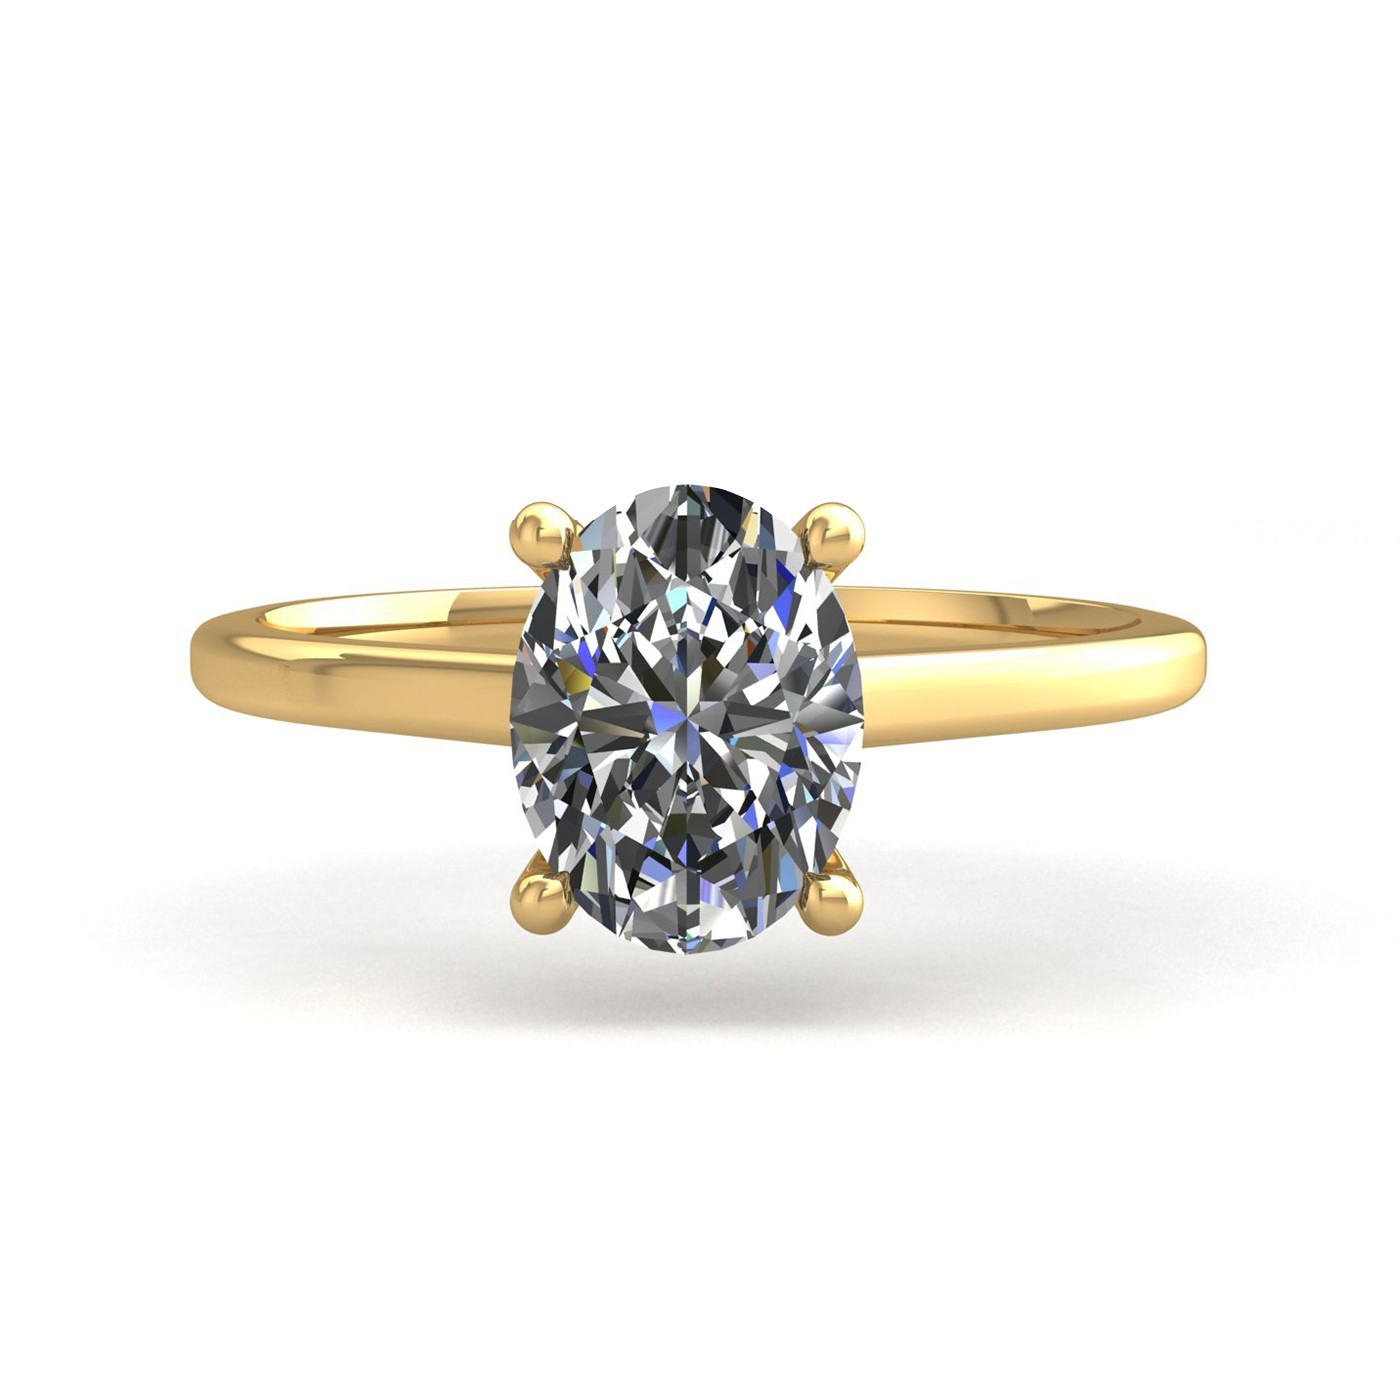 18k yellow gold  1,20 ct 4 prongs solitaire oval cut diamond engagement ring with whisper thin band Photos & images